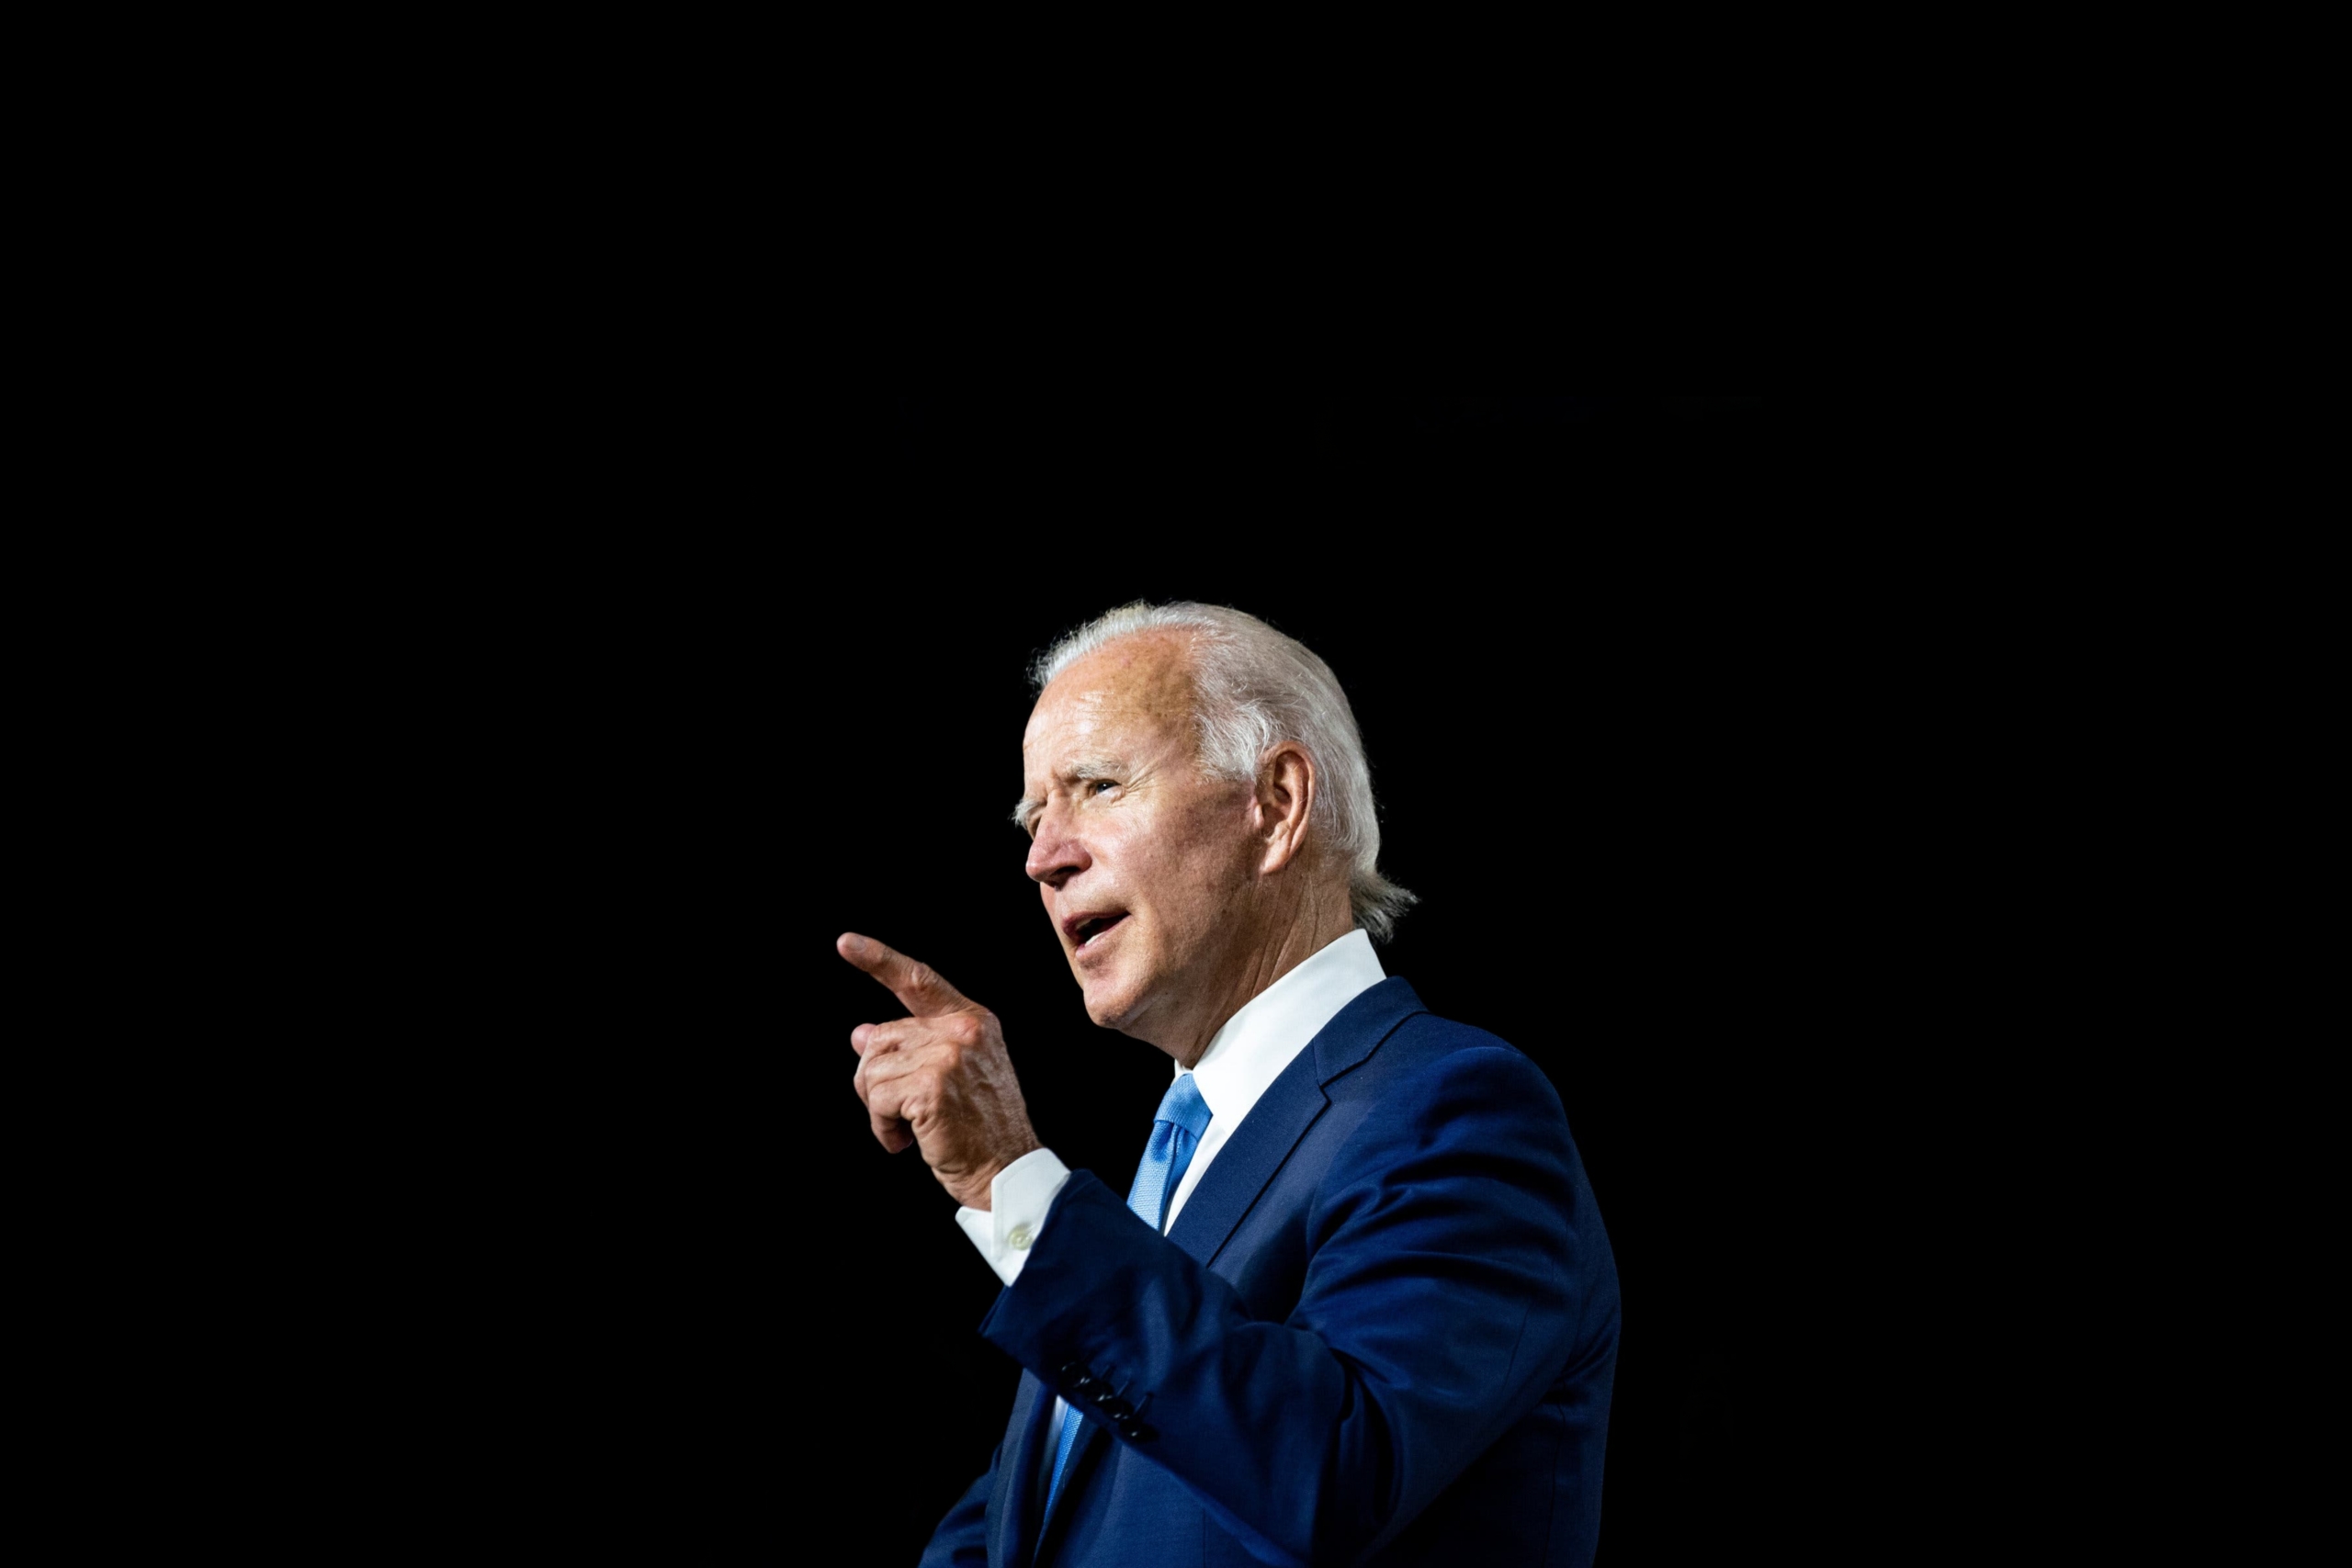 Biden: Hamas unleashed pure unadulterated evil, evoked memories of Jewish genocide